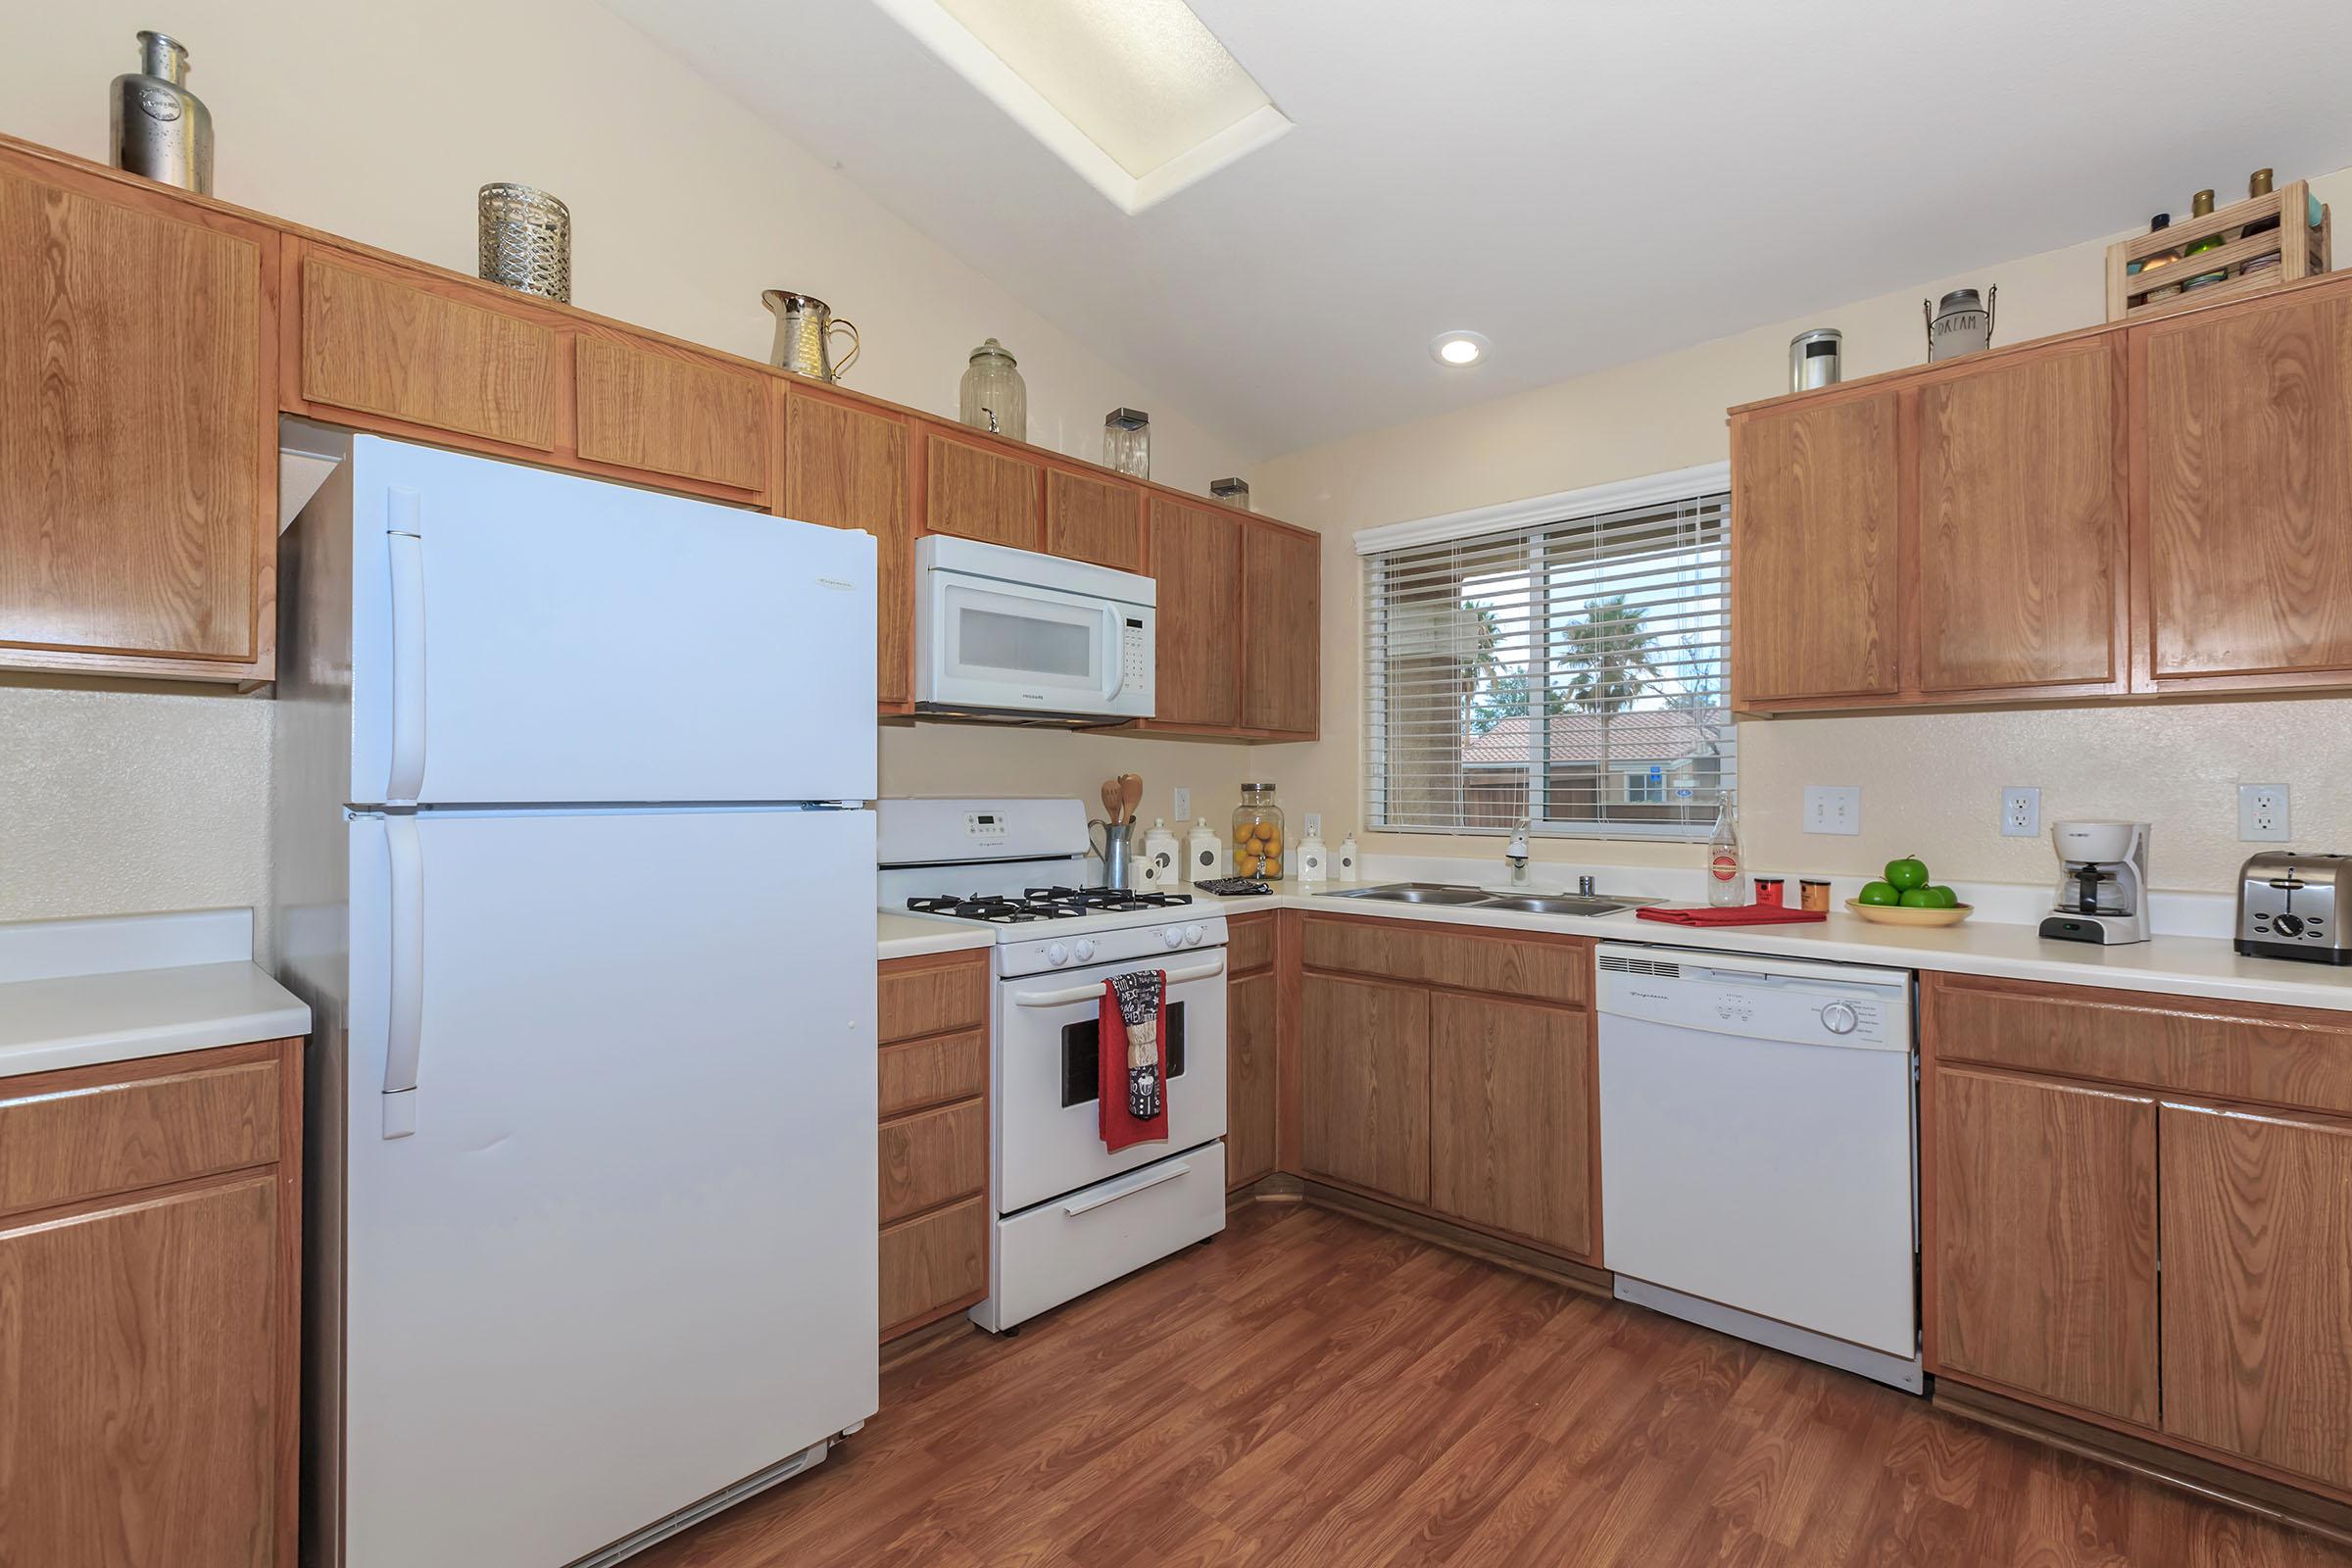 LARGE, FULLY-EQUIPPED KITCHENS